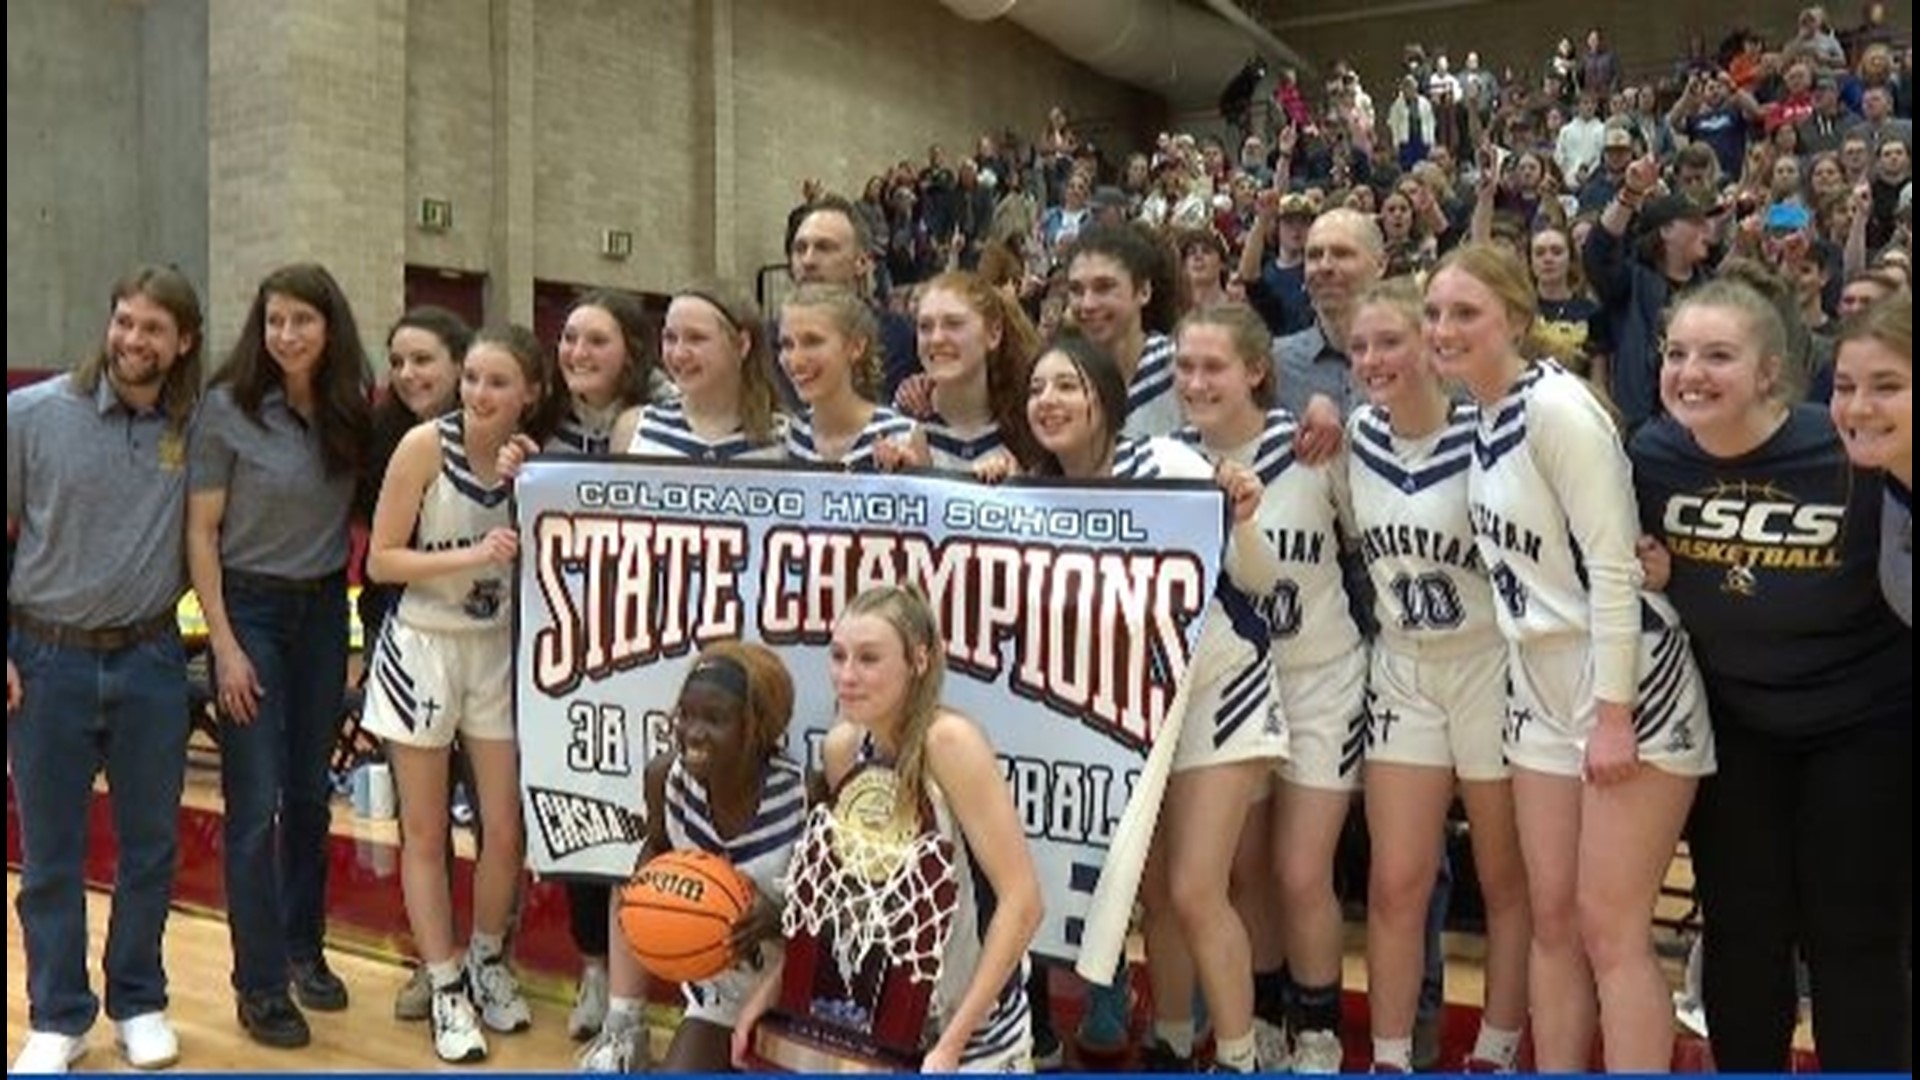 CSCS beat Vanguard 57-41 for the Lions' first title since 2002. Freshman Kinley Asp recorded a game-high 29 points.